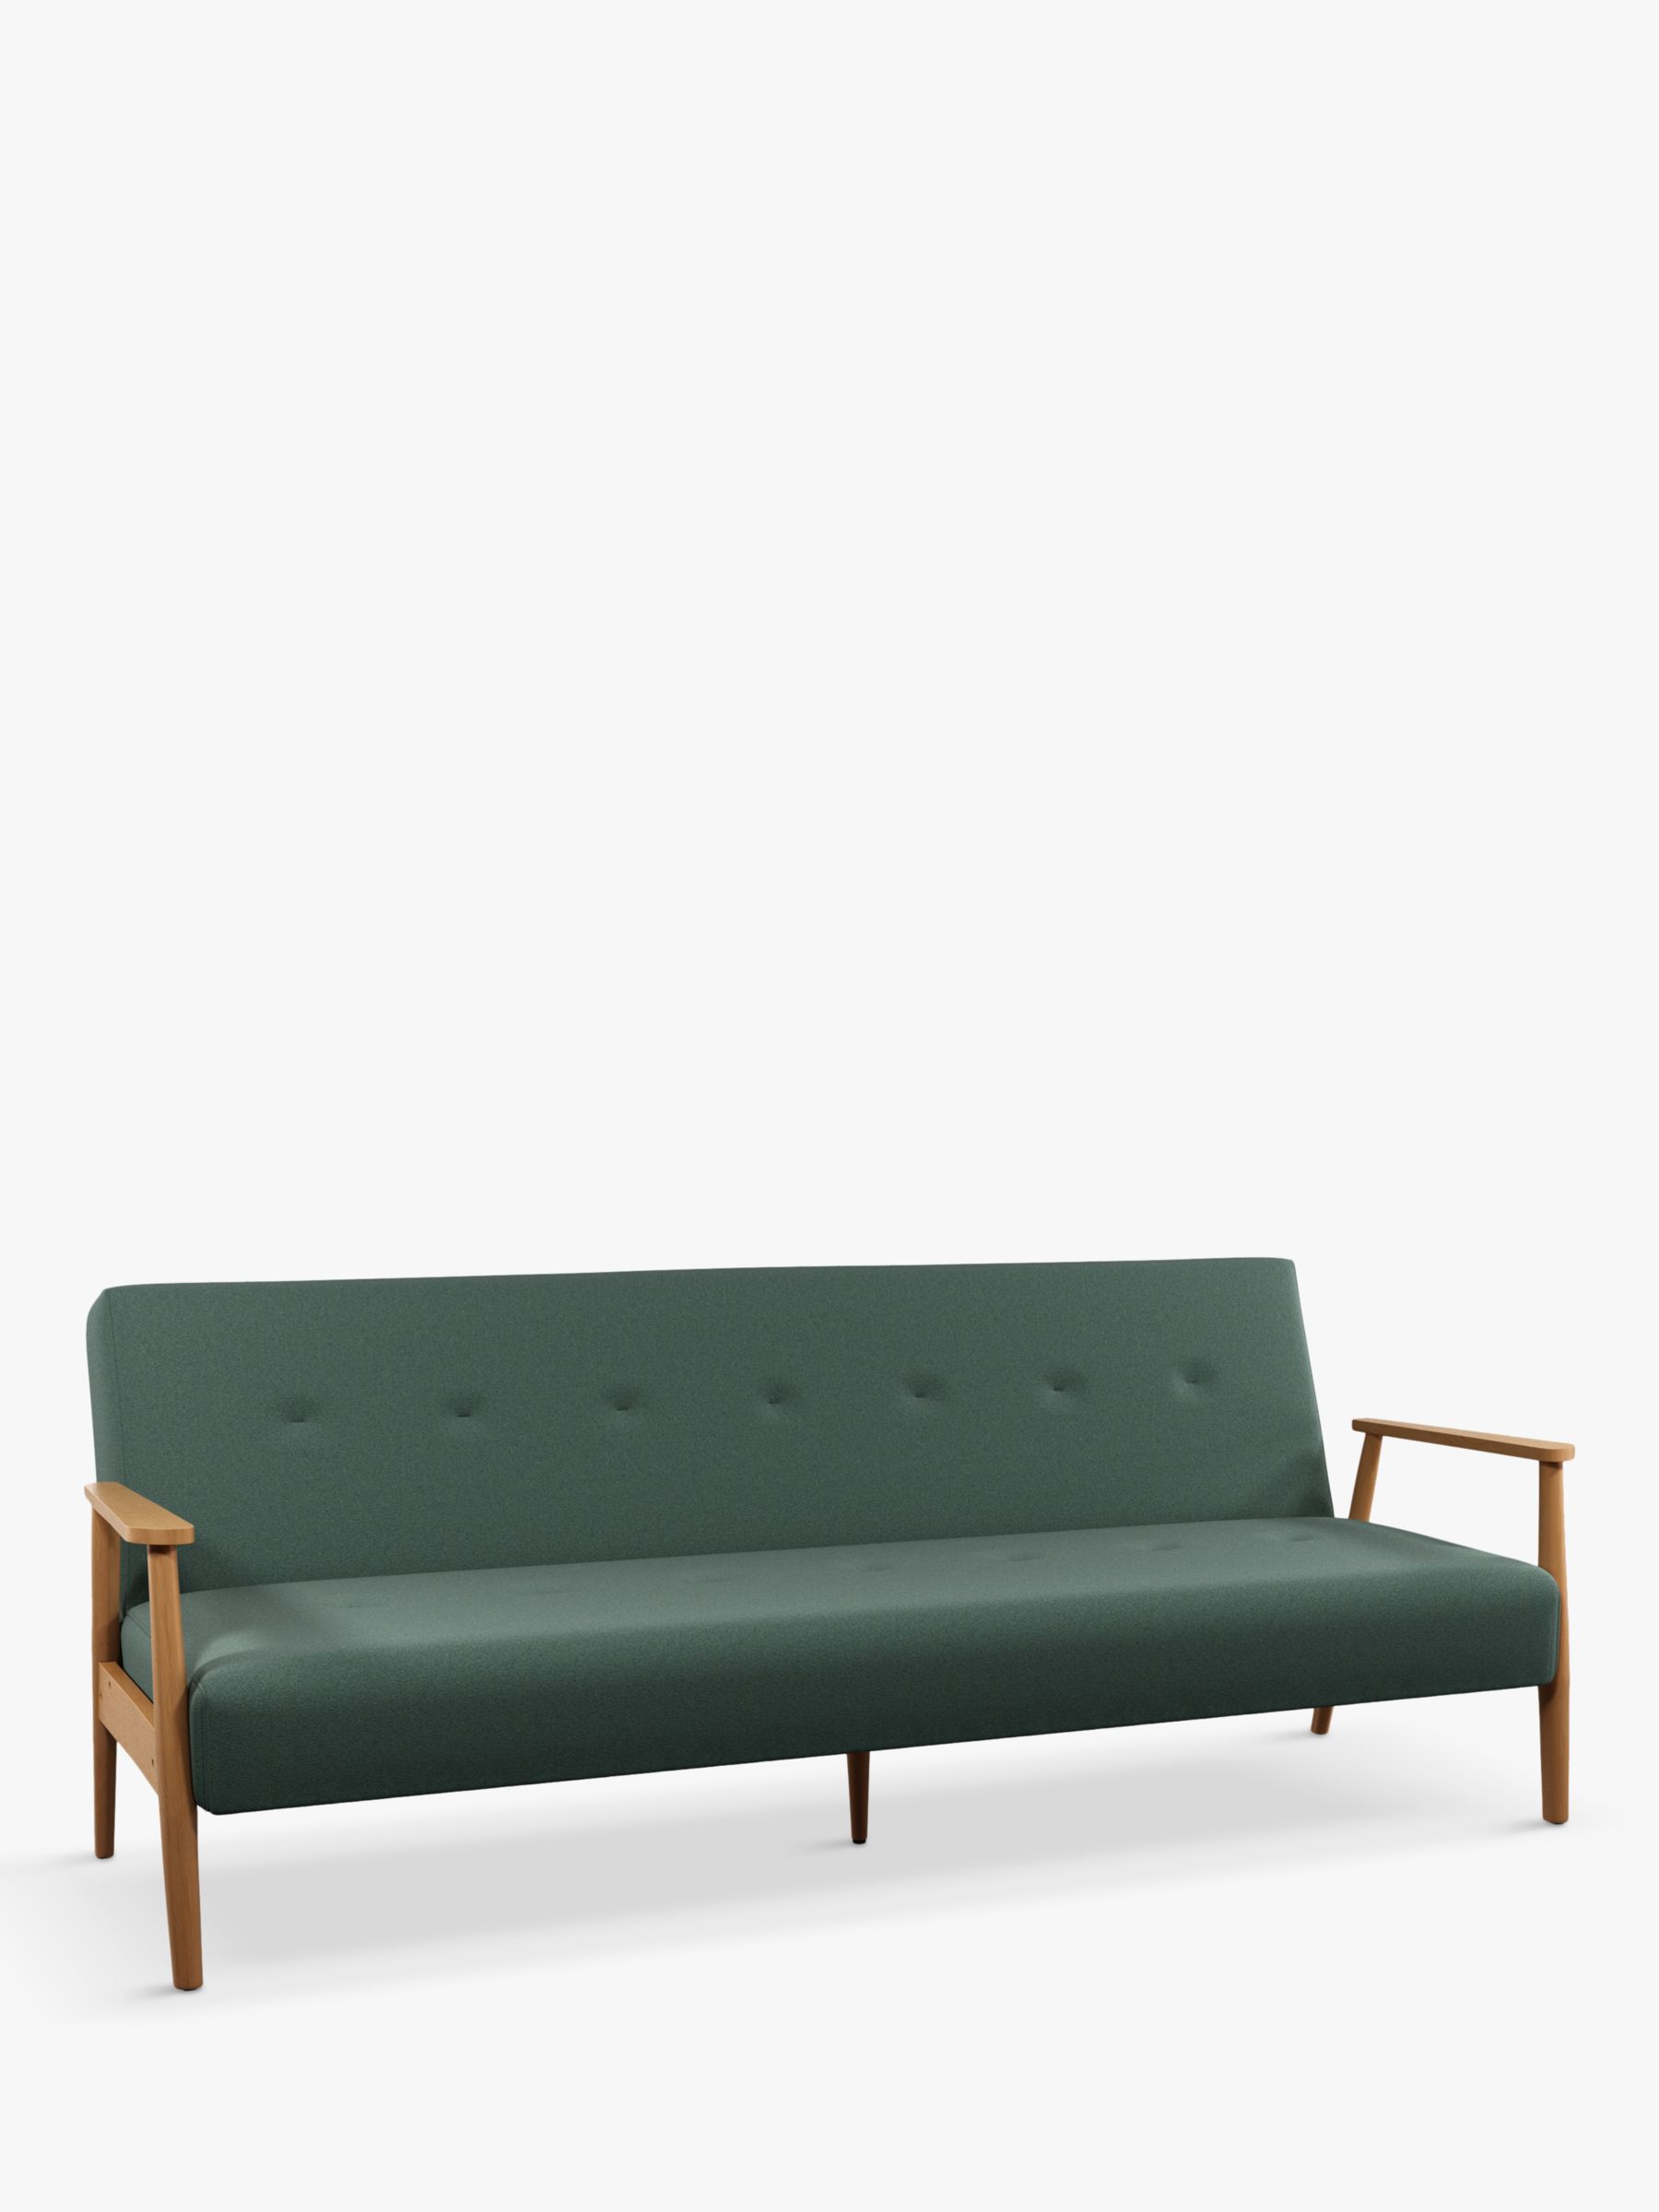 John Lewis Anyday Show Wood Bench Large 3 Seater Sofa Bed Light Leg Cord Green